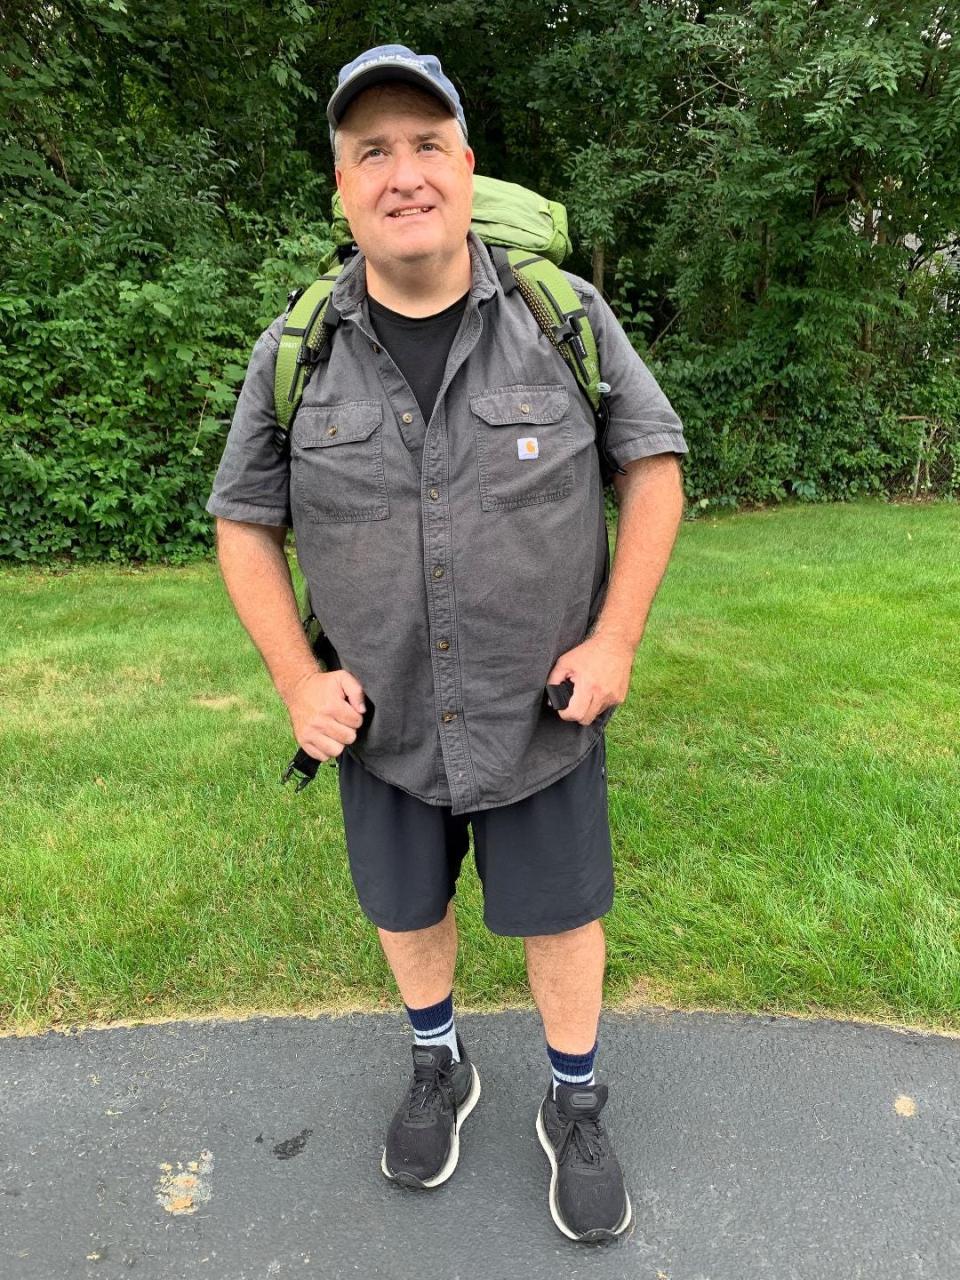 Michael McKenna, who is walking across the southern United States to raise money for the New England Center for Children, has raised about $800,000 for the Southborough school that his son attended and which McKenna says "provides the gold standard for severely autistic children."